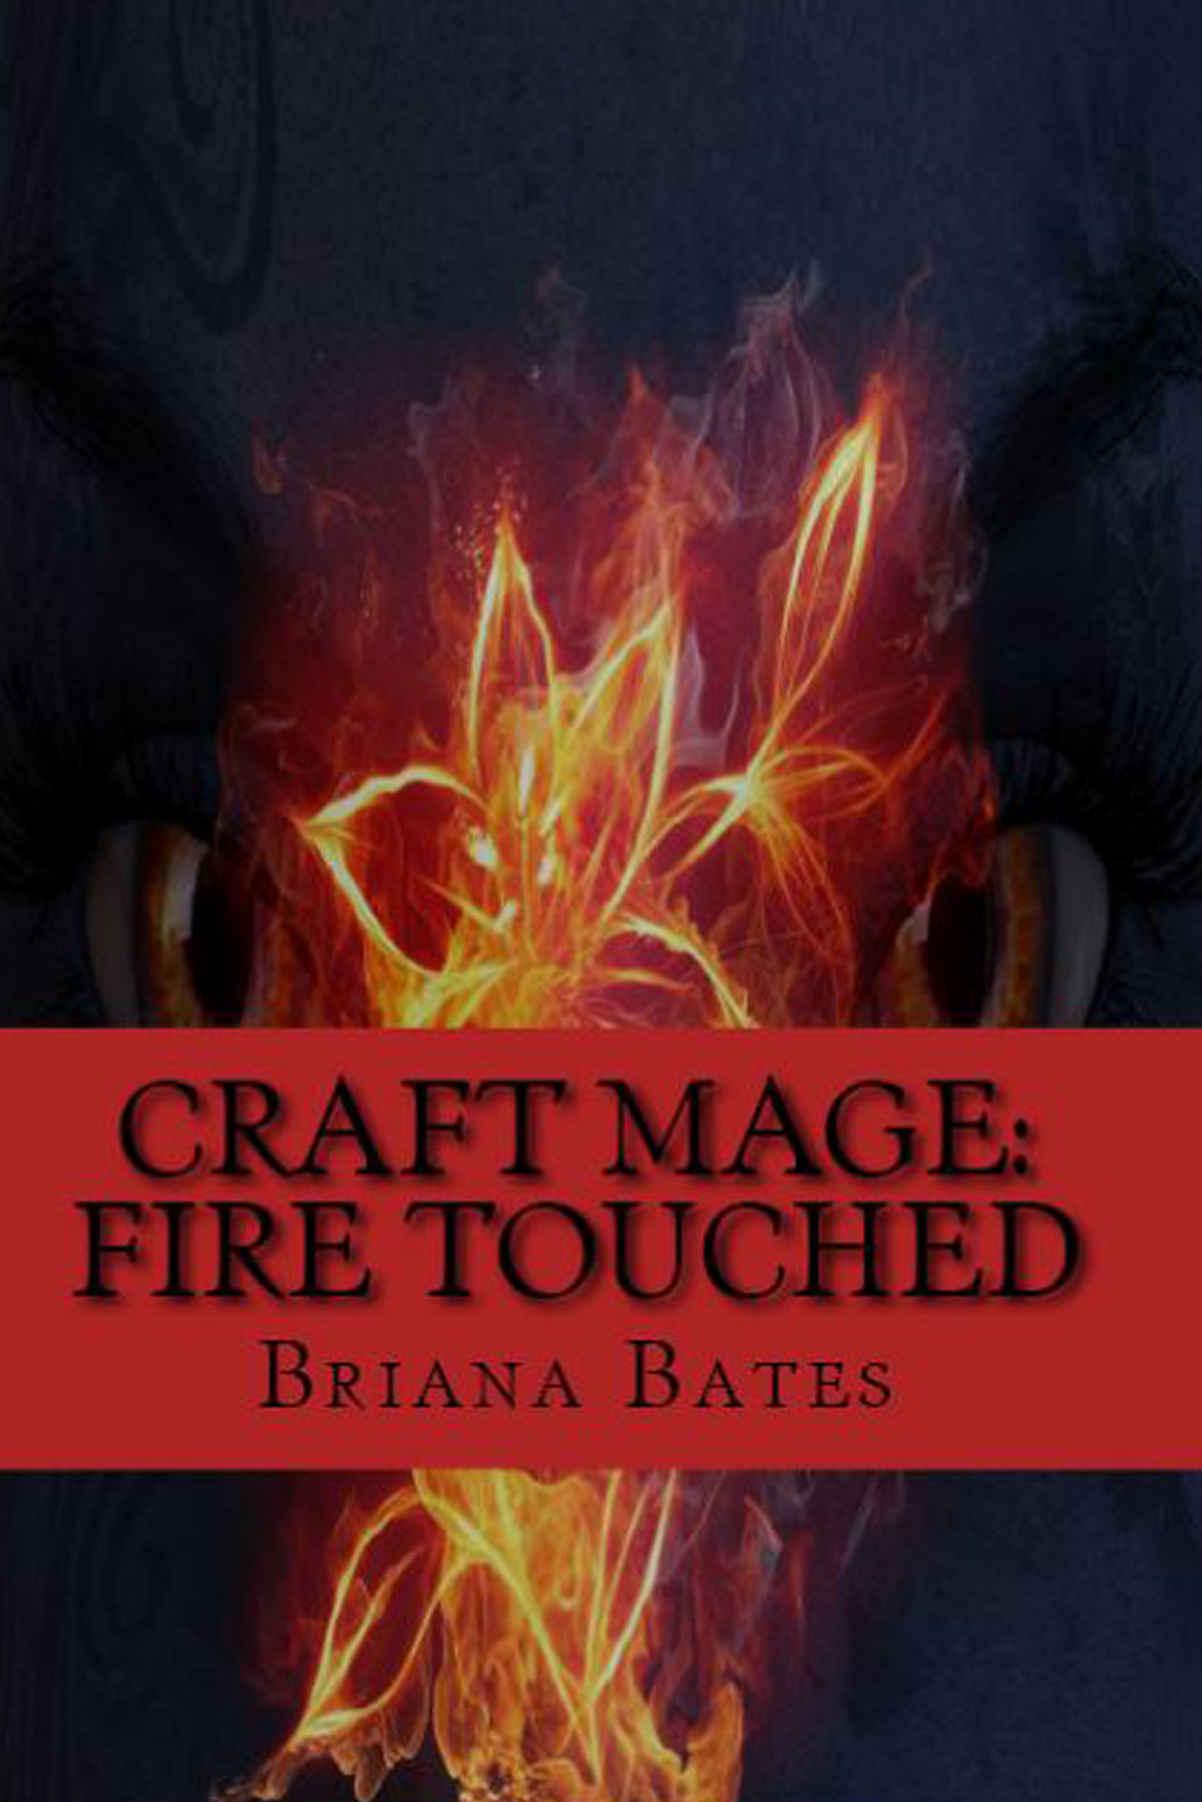 Craft Mage: Fire Touched